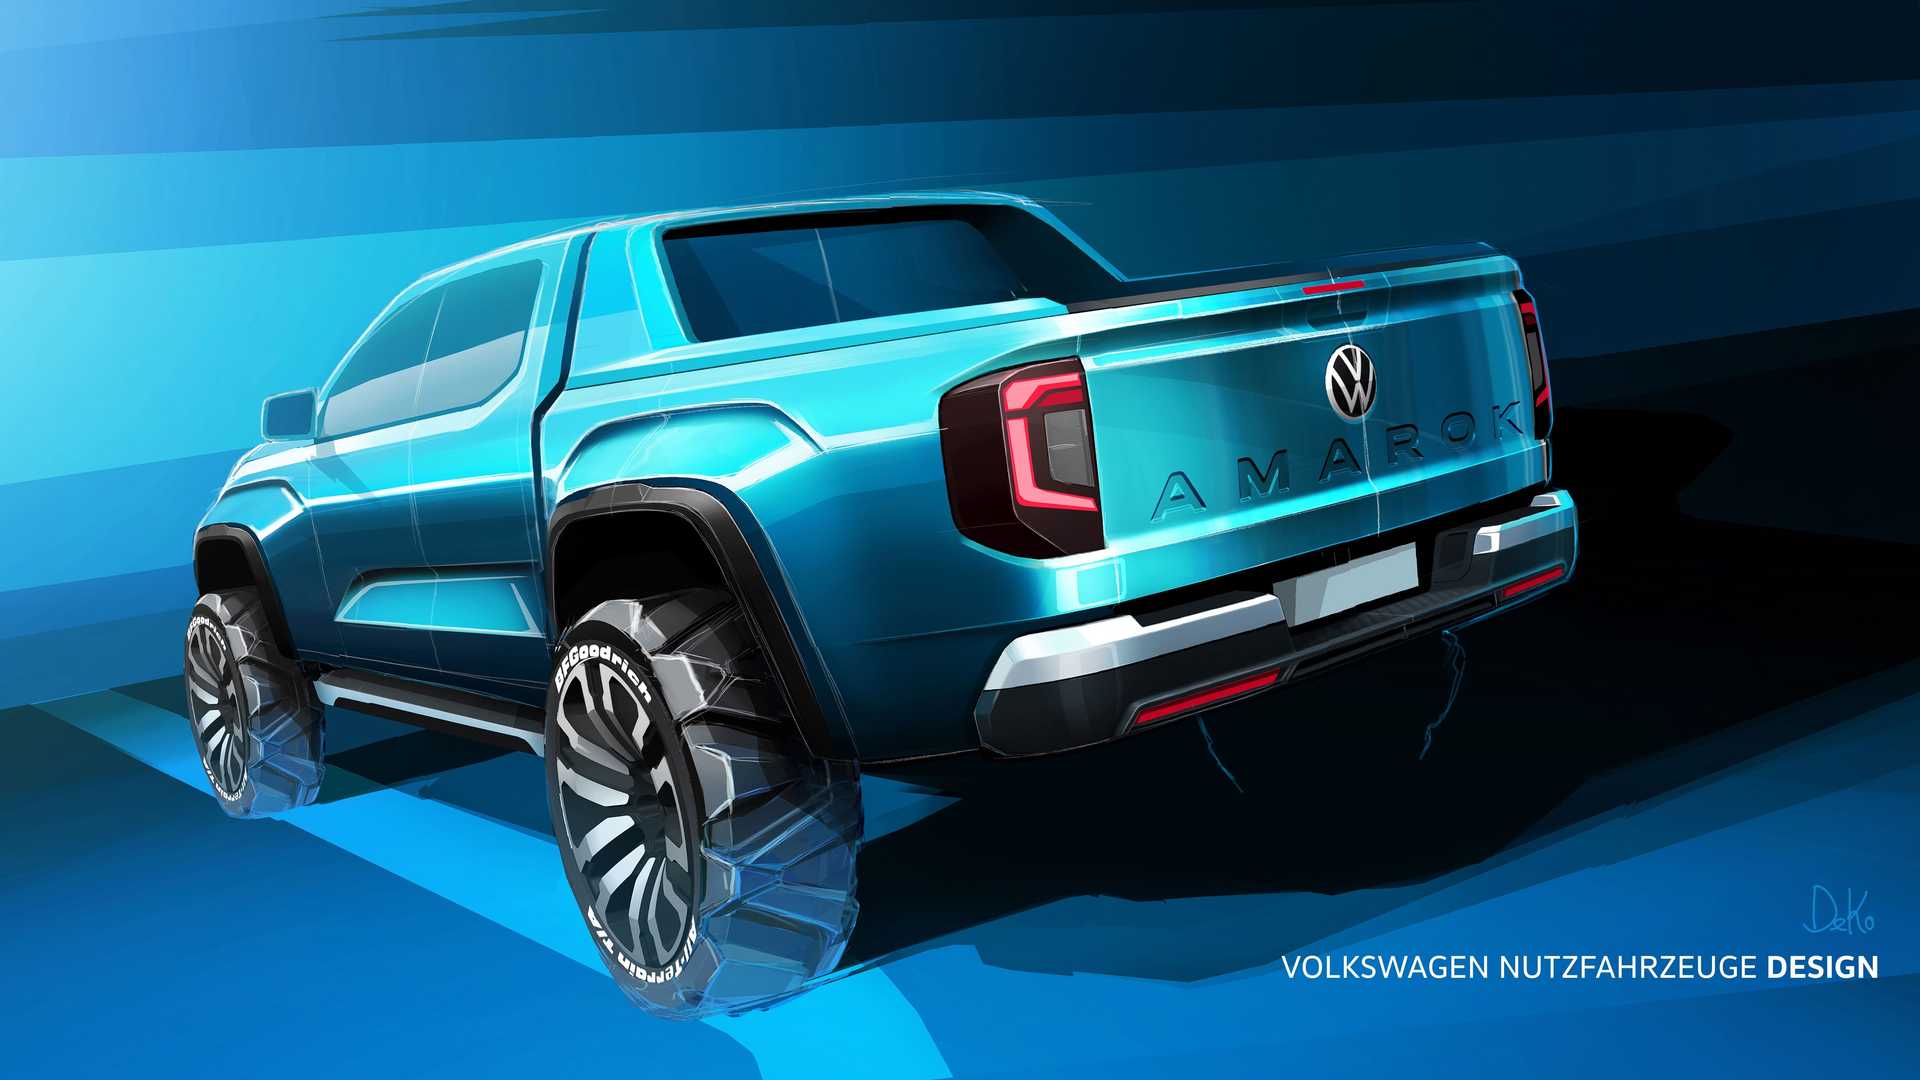 In pics: 2023 Volkswagen Amarok is what we want in India, but it's not coming